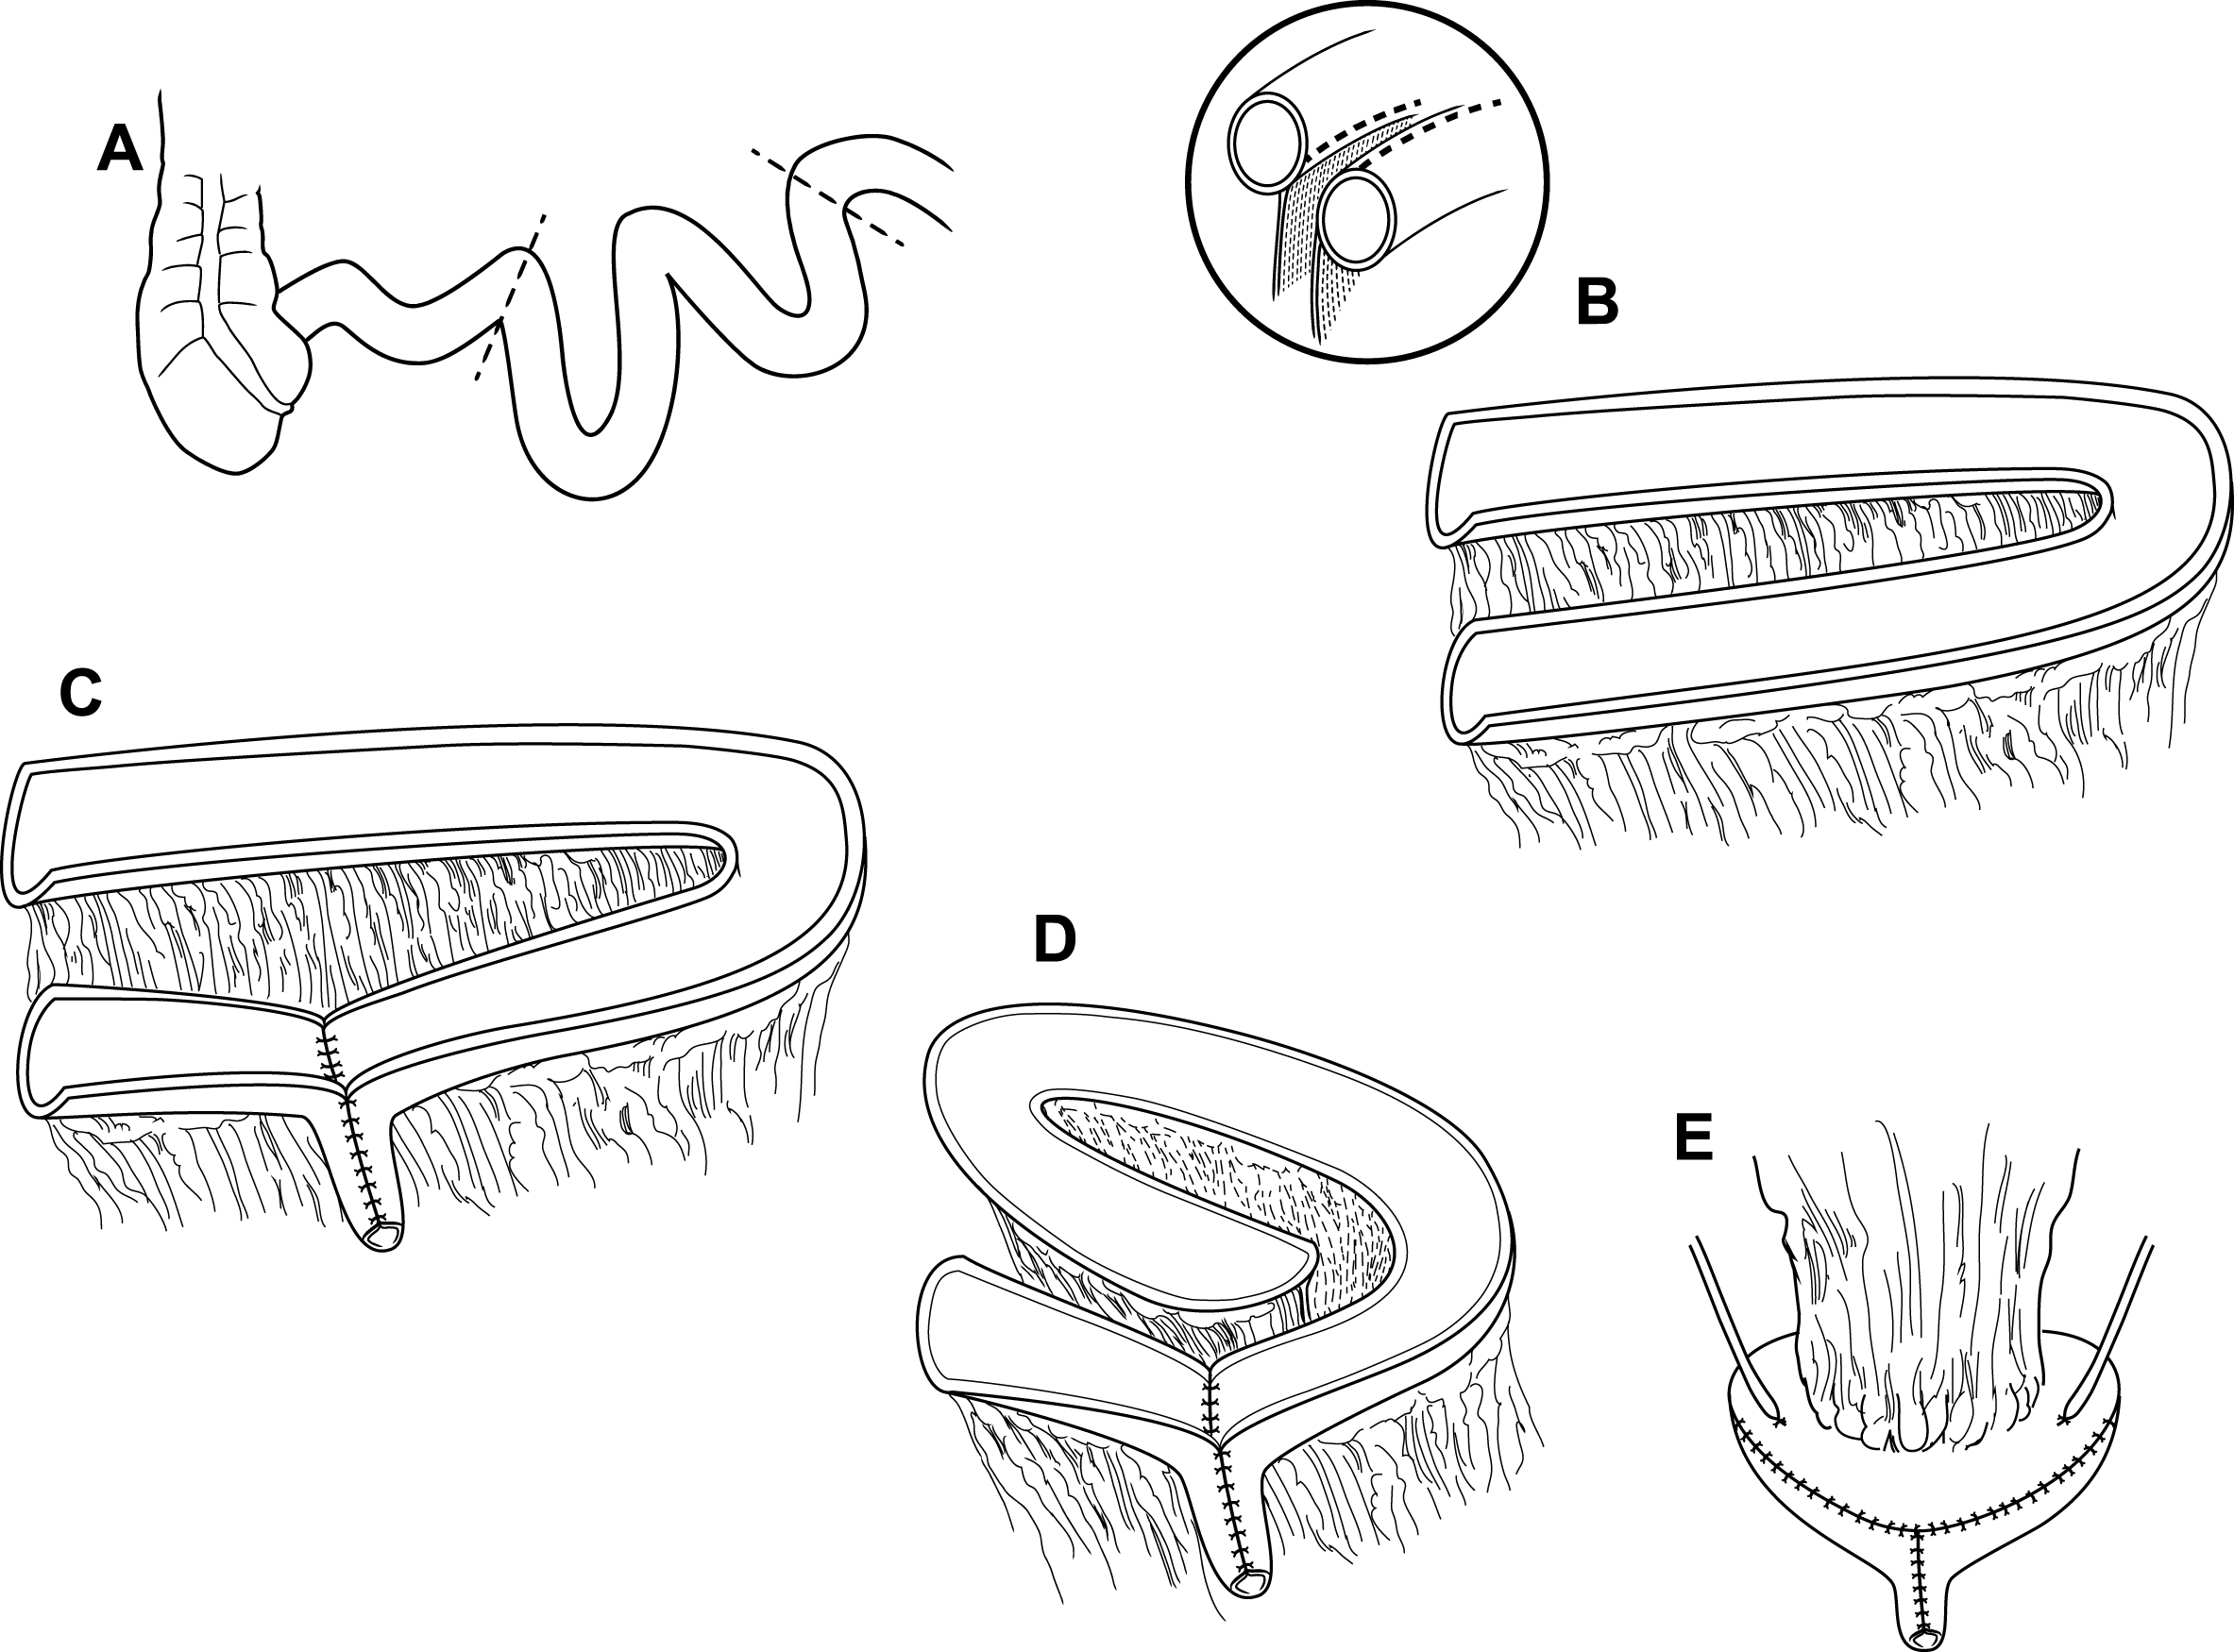 Modified VIP neobladder construction. (A) A 40–50 cm distal ileal segment is chosen approximately 15–20 cm from the ileocecal valve and (B) is folded into a sideways “U” configuration. The small bowel is opened longitudinally, close to the mesenteric border instead of along the true anti-mesentery. (C) The distal segment of bowel is tubularized into the neourethra and (D) the proximal segment is folded into a spiral configuration with adjacent bowel sutured together to approximate the new posterior wall. (E) The pouch is folded onto itself in a cephalad to caudad fashion and both ureters are reimplanted anteriorly on their respective sides.